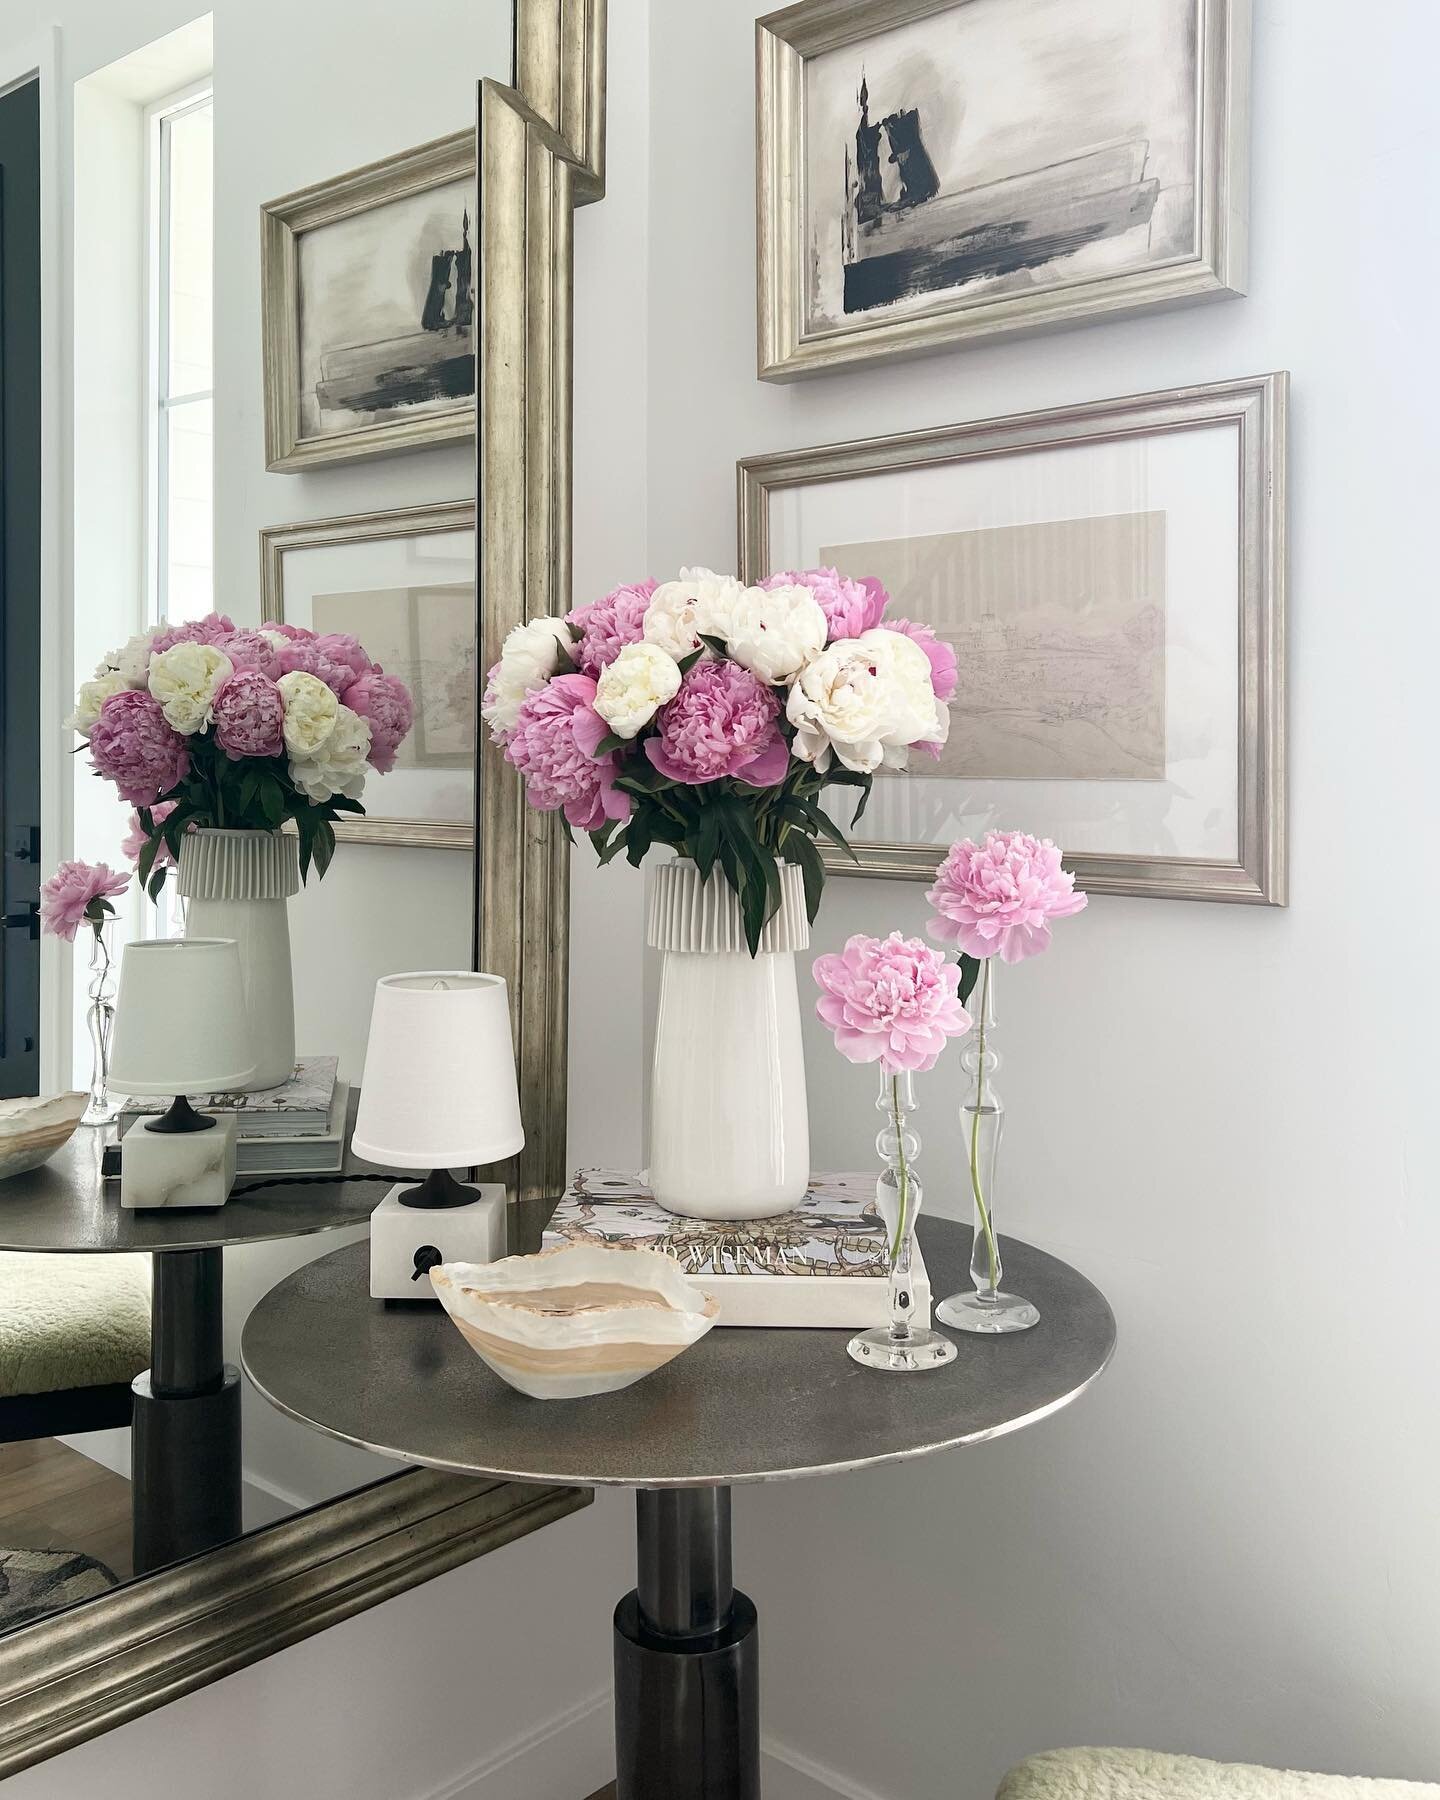 Today is a cold 30&deg; in Salt Lake and we&rsquo;re just wishing it was peony season again! Who else ready for some warmer weather and sunshine?! 
.
.
.
.
.
.
.
.
.
.
.
.
.
.
.
.
.
.
.
.
.
.
#fifthandcranedesign #fifthandcrane #dreamitdesignit #peon